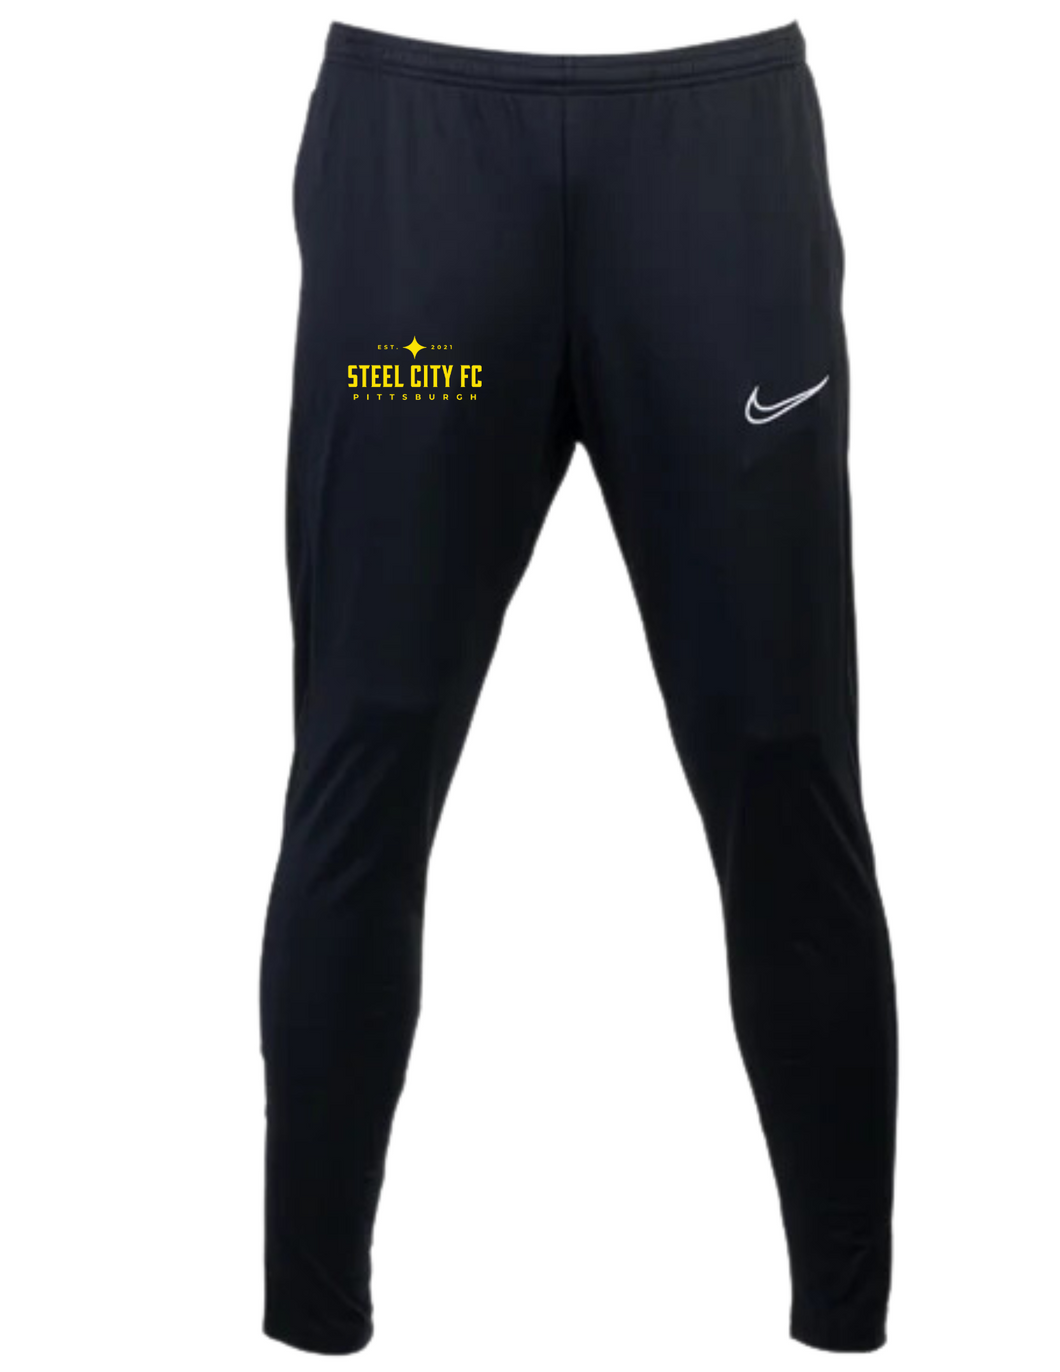 NEW!!! AVAILABLE FOR PRE-ORDER - SCFC - Nike Academy 23 Training Pants